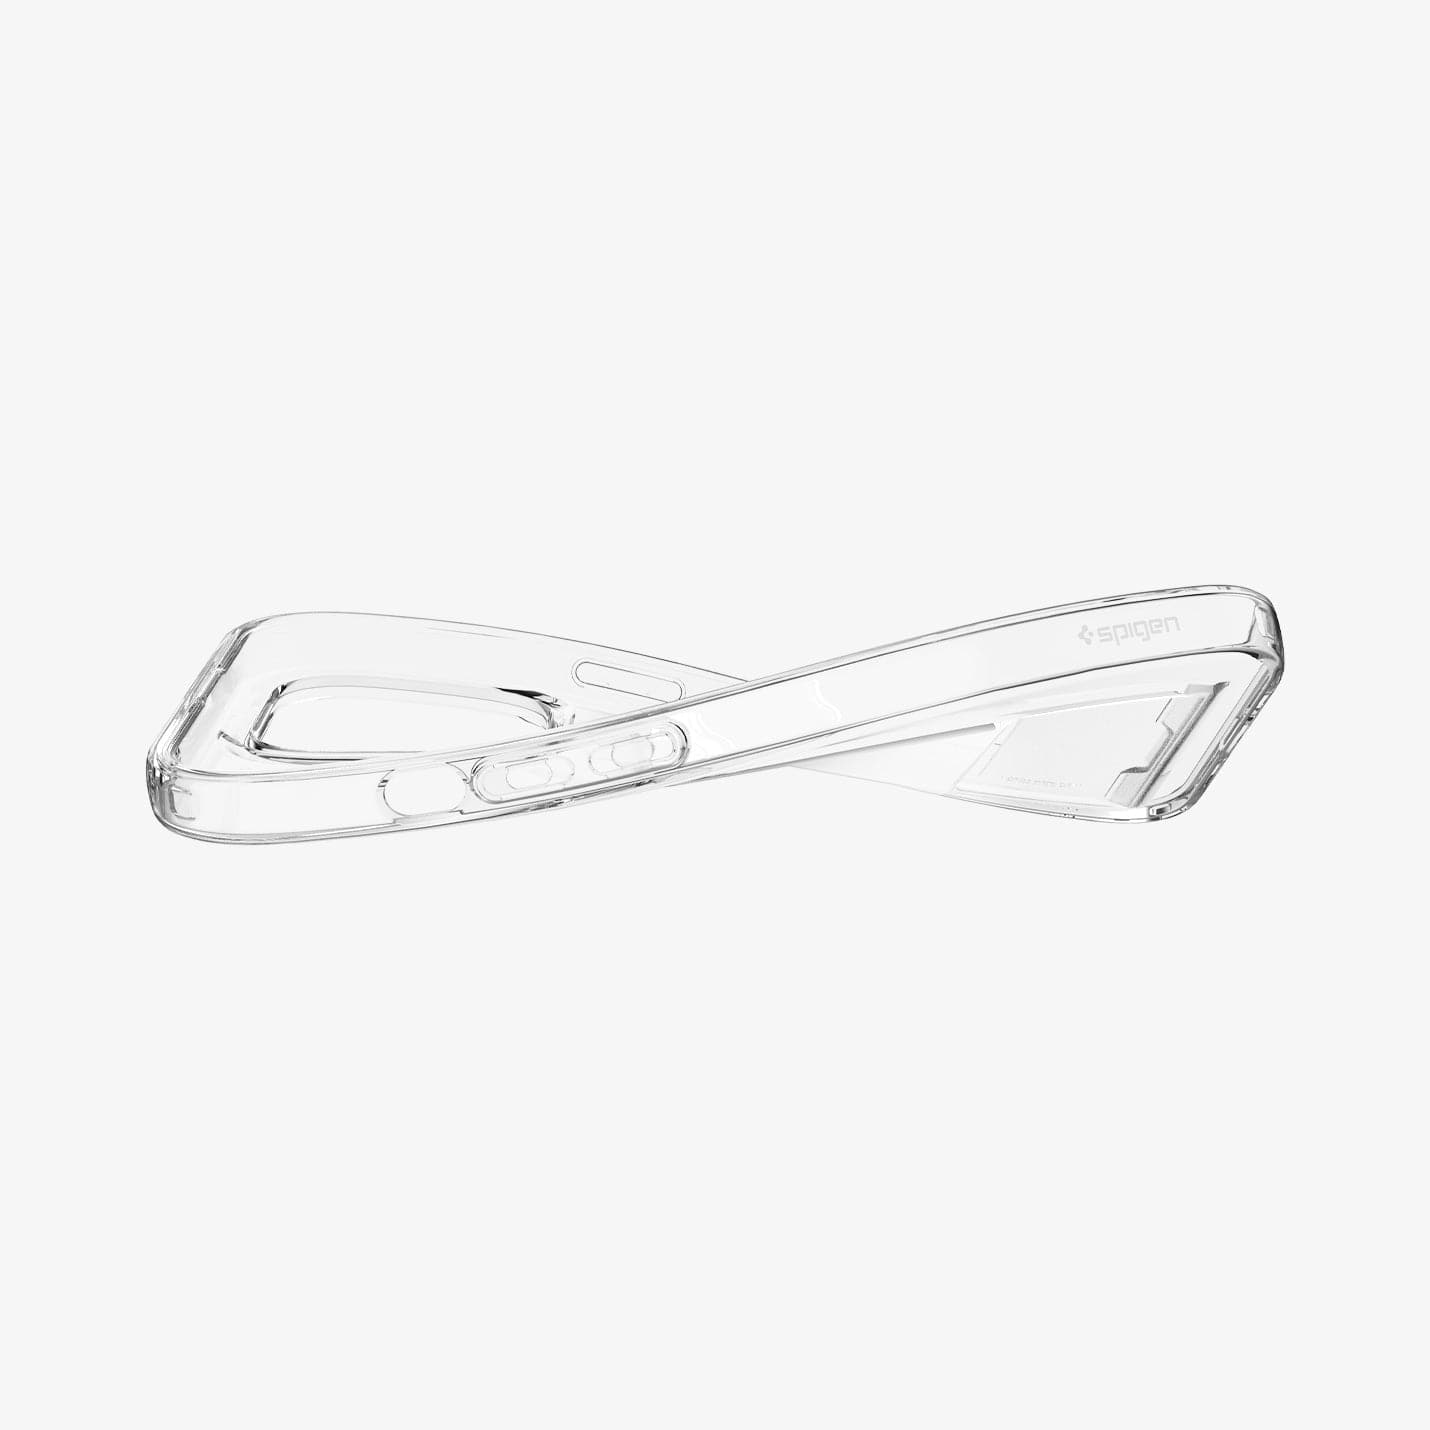 ACS04976 - iPhone 14 Pro Case Crystal Slot in crystal clear showing the case bending to show the flexibility